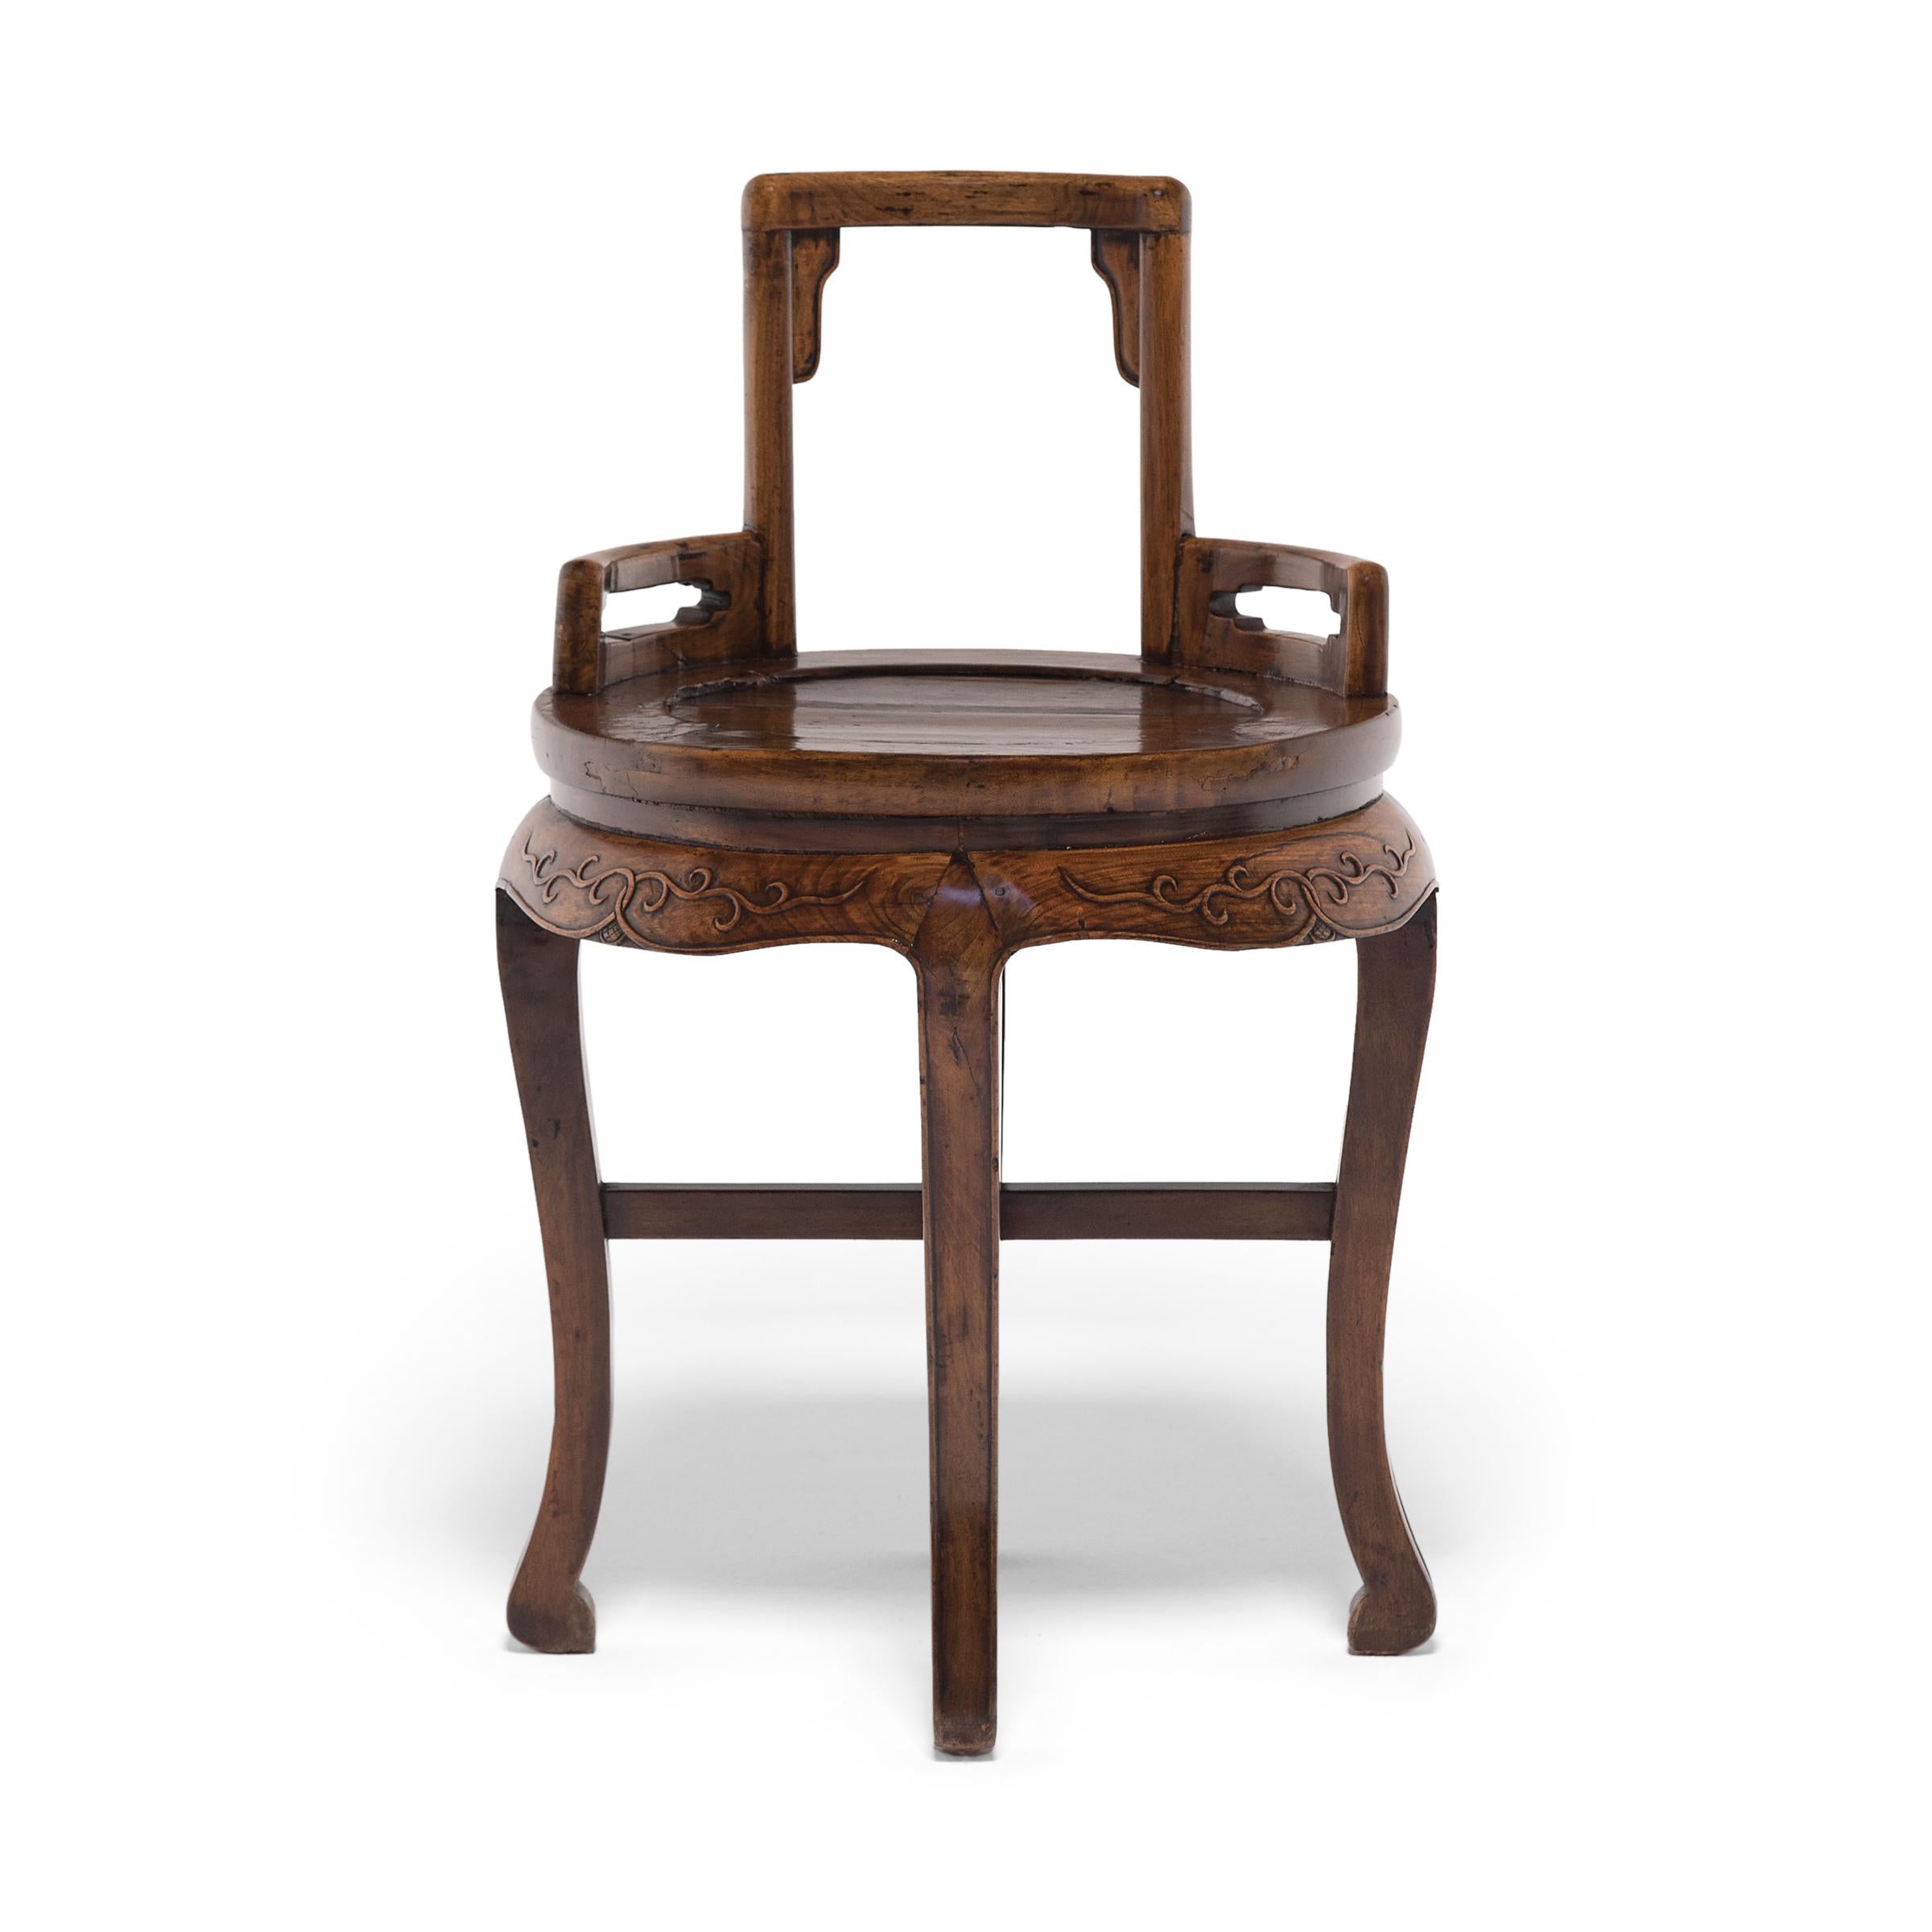 Dated to the late 19th century, these petite ladies' chairs combine the low, square backs of traditional rose chairs with the round frames and cabriole legs of waisted display tables. Each chair features an open back with shallow arms, curved to